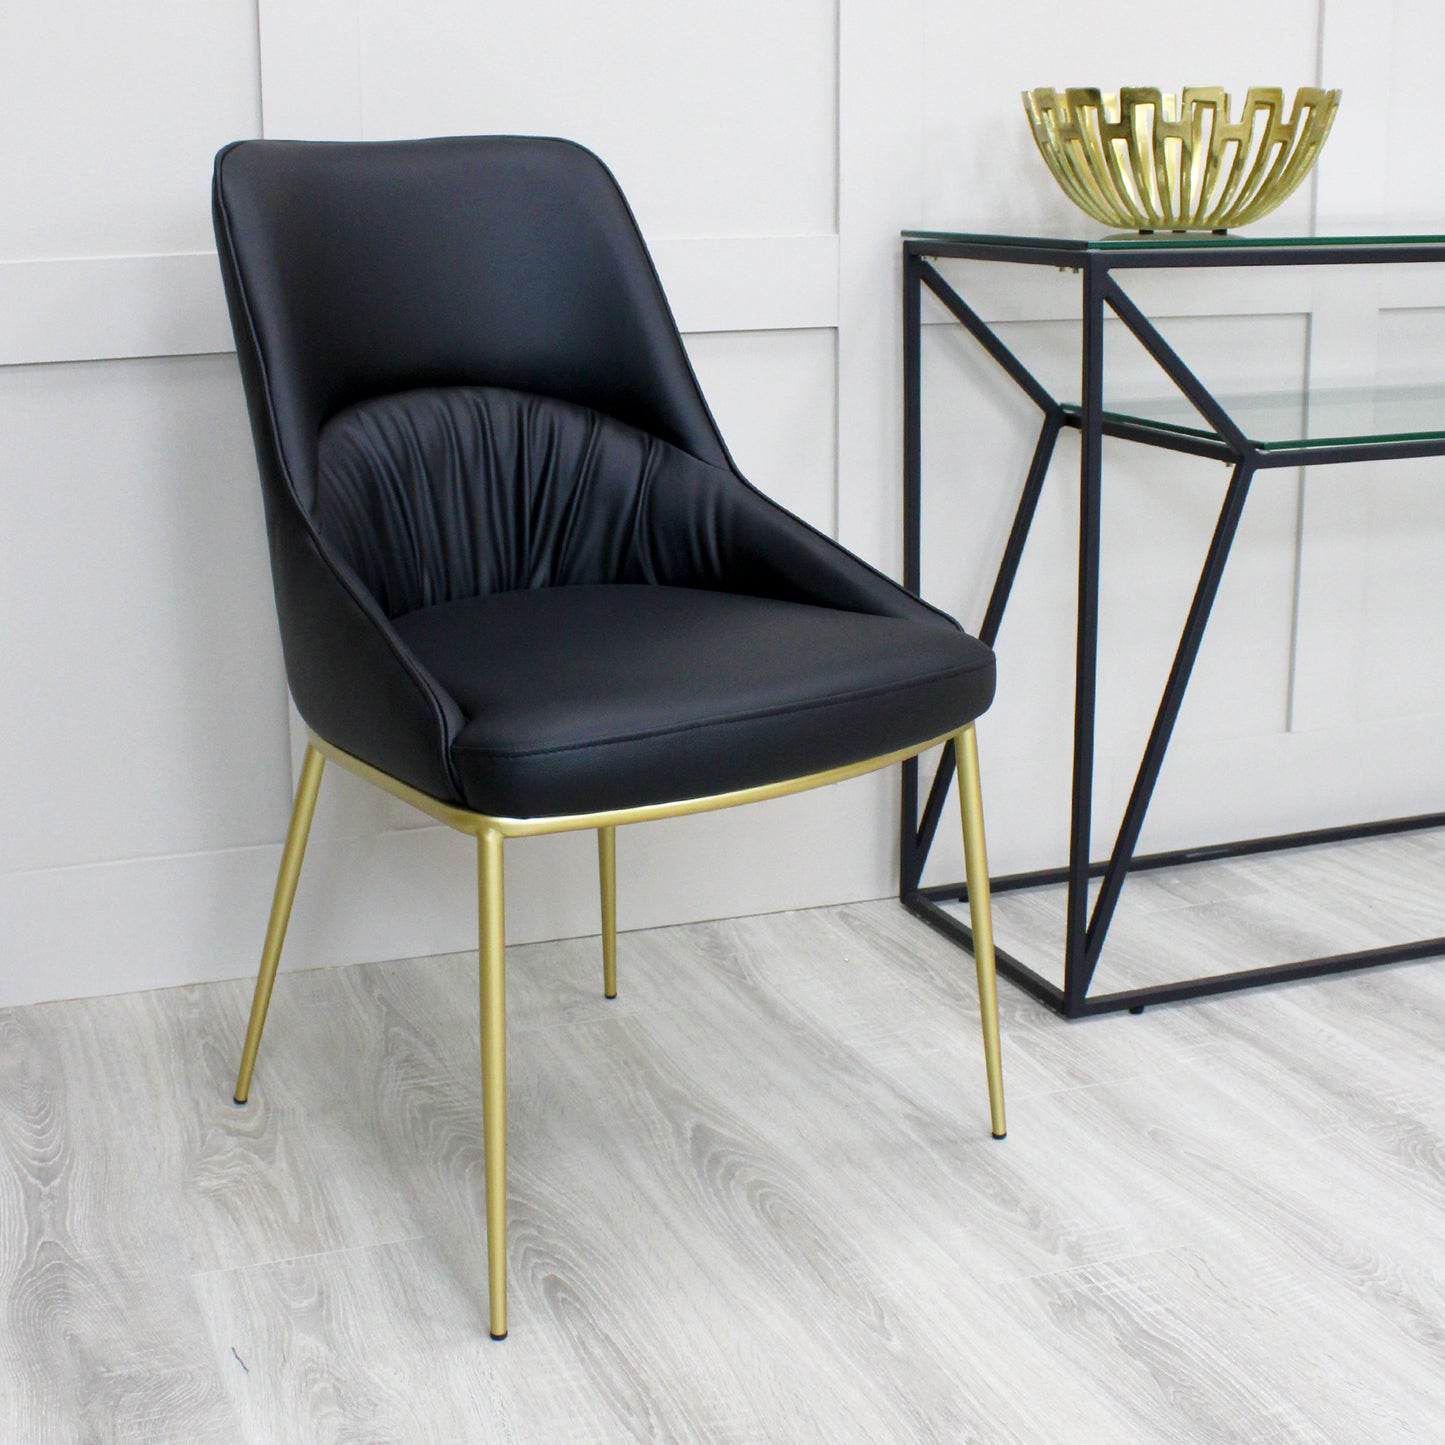 Black Leather Dining Chair Wrinkle Design With Gold Legs